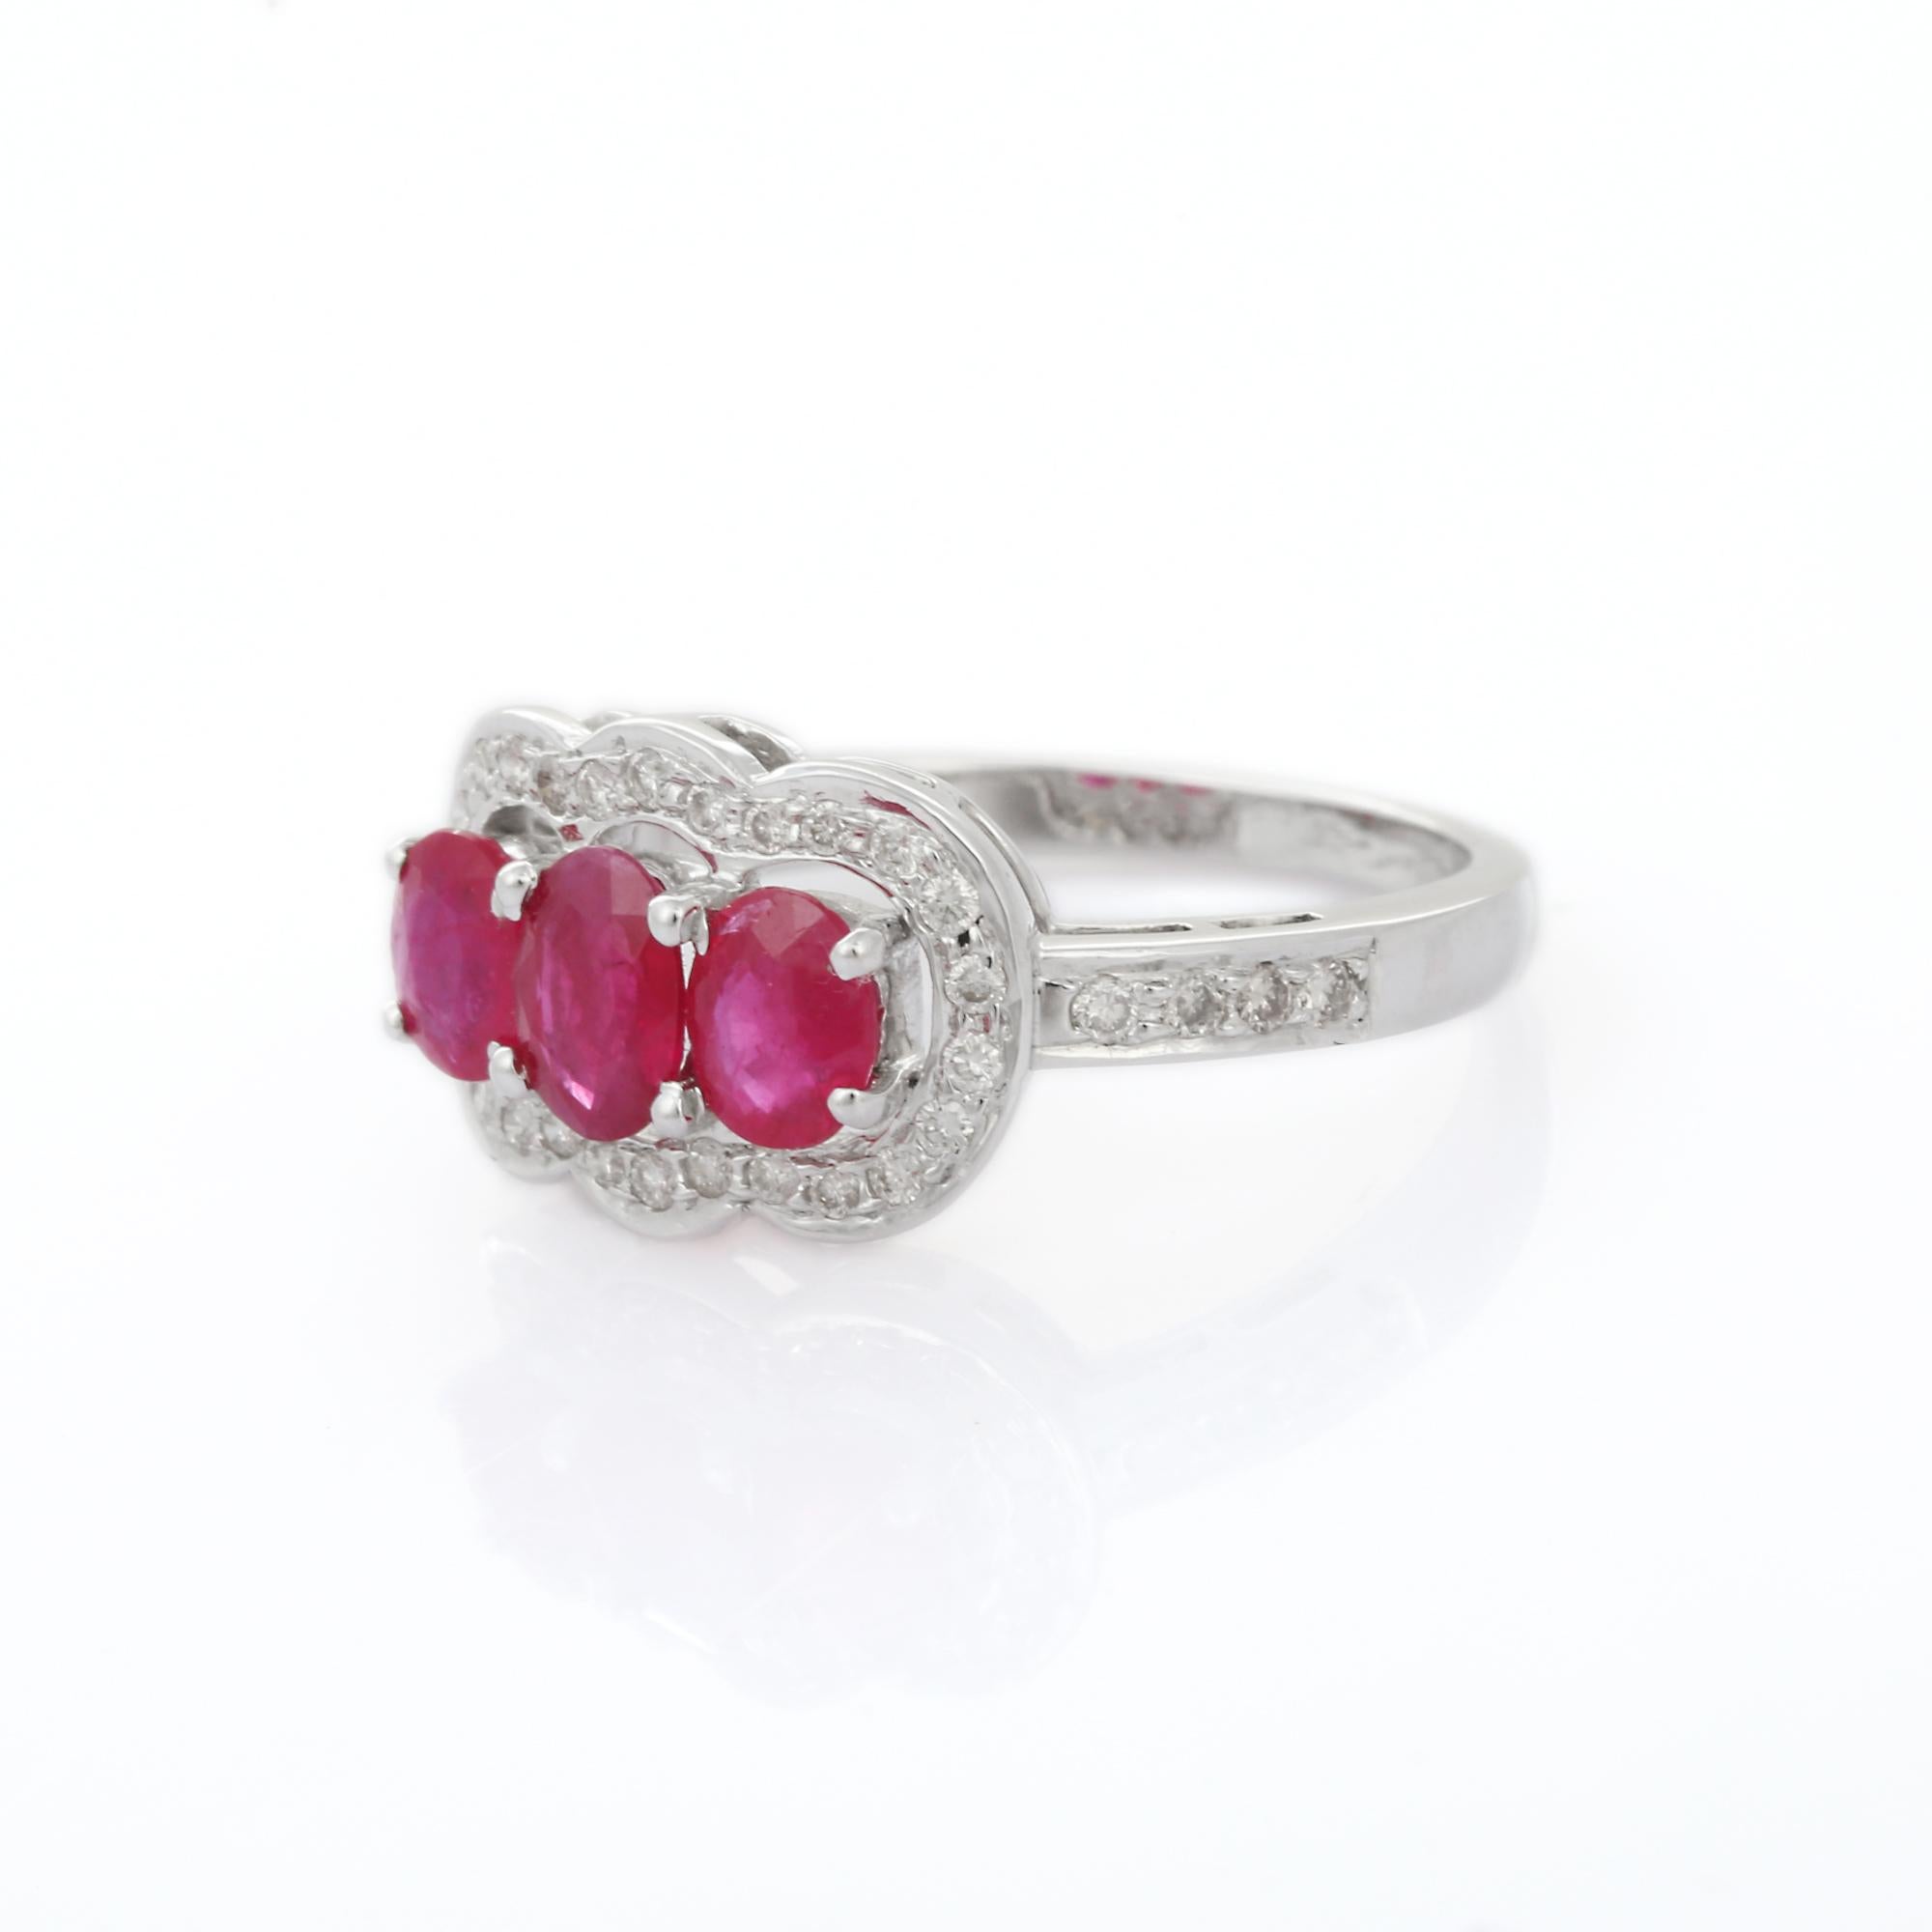 For Sale:  Oval Cut Three Stone Ruby Engagement Ring in 18K White Gold with Diamonds 5